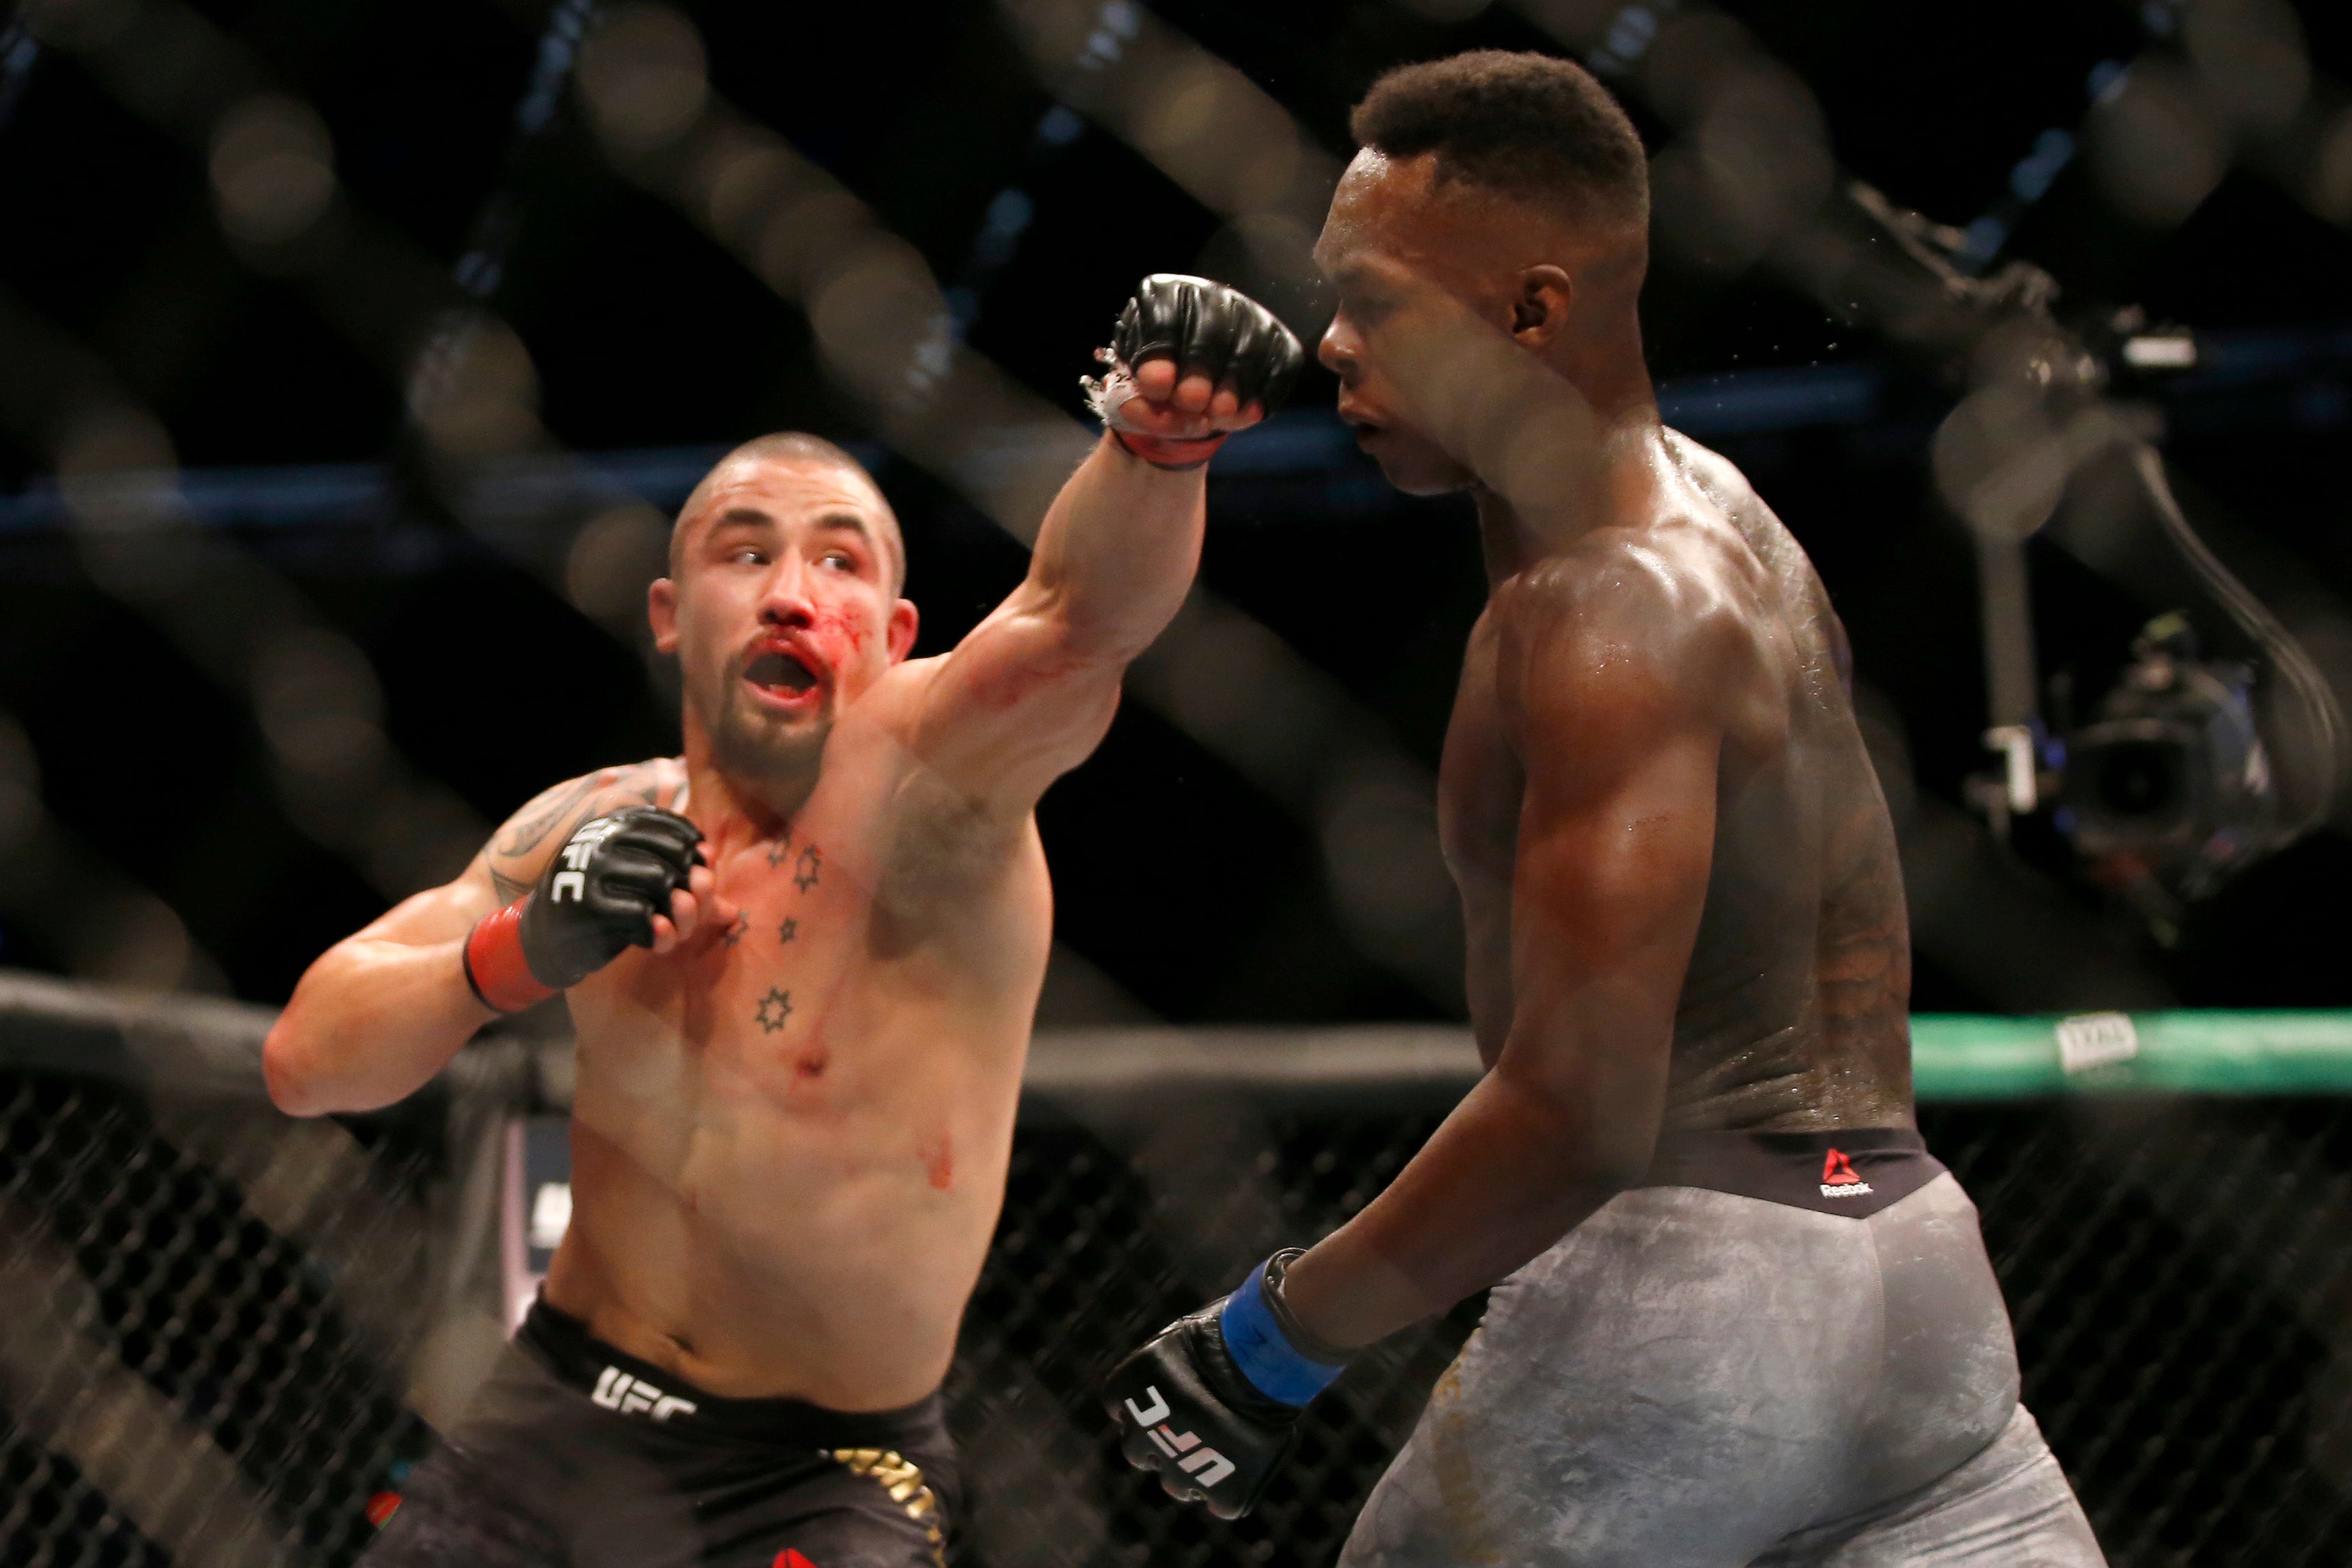 Israel Adesanya (right) evades a punch from Robert Whittaker at UFC 243